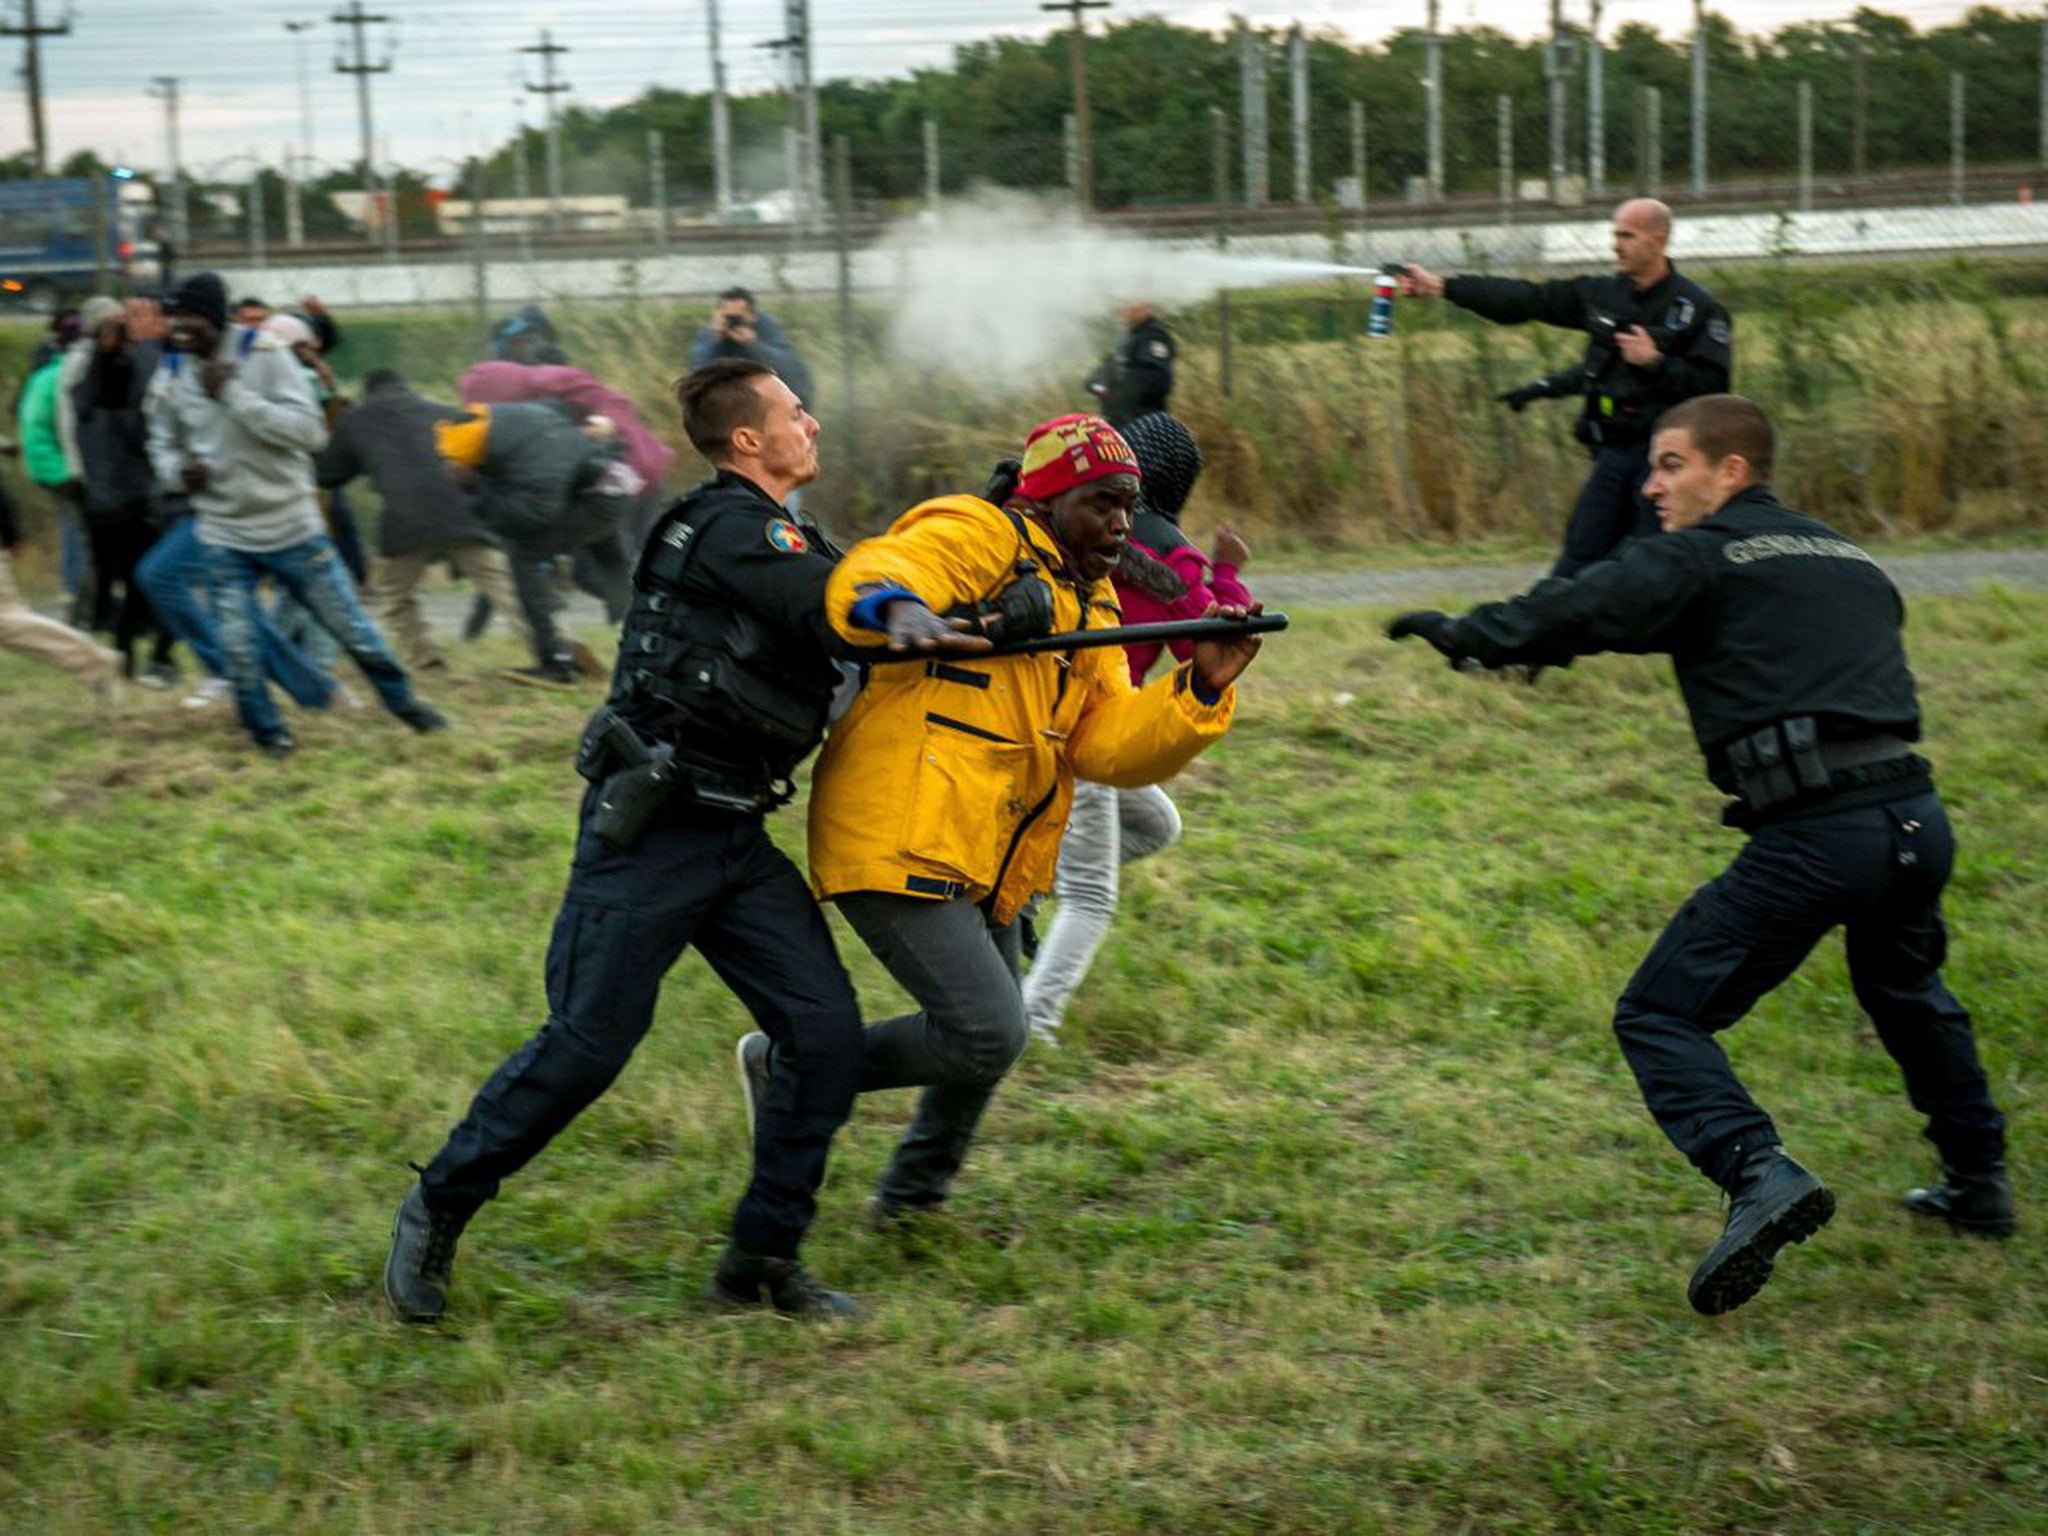 Channel clash: a migrant is held back by French police at the Eurotunnel site